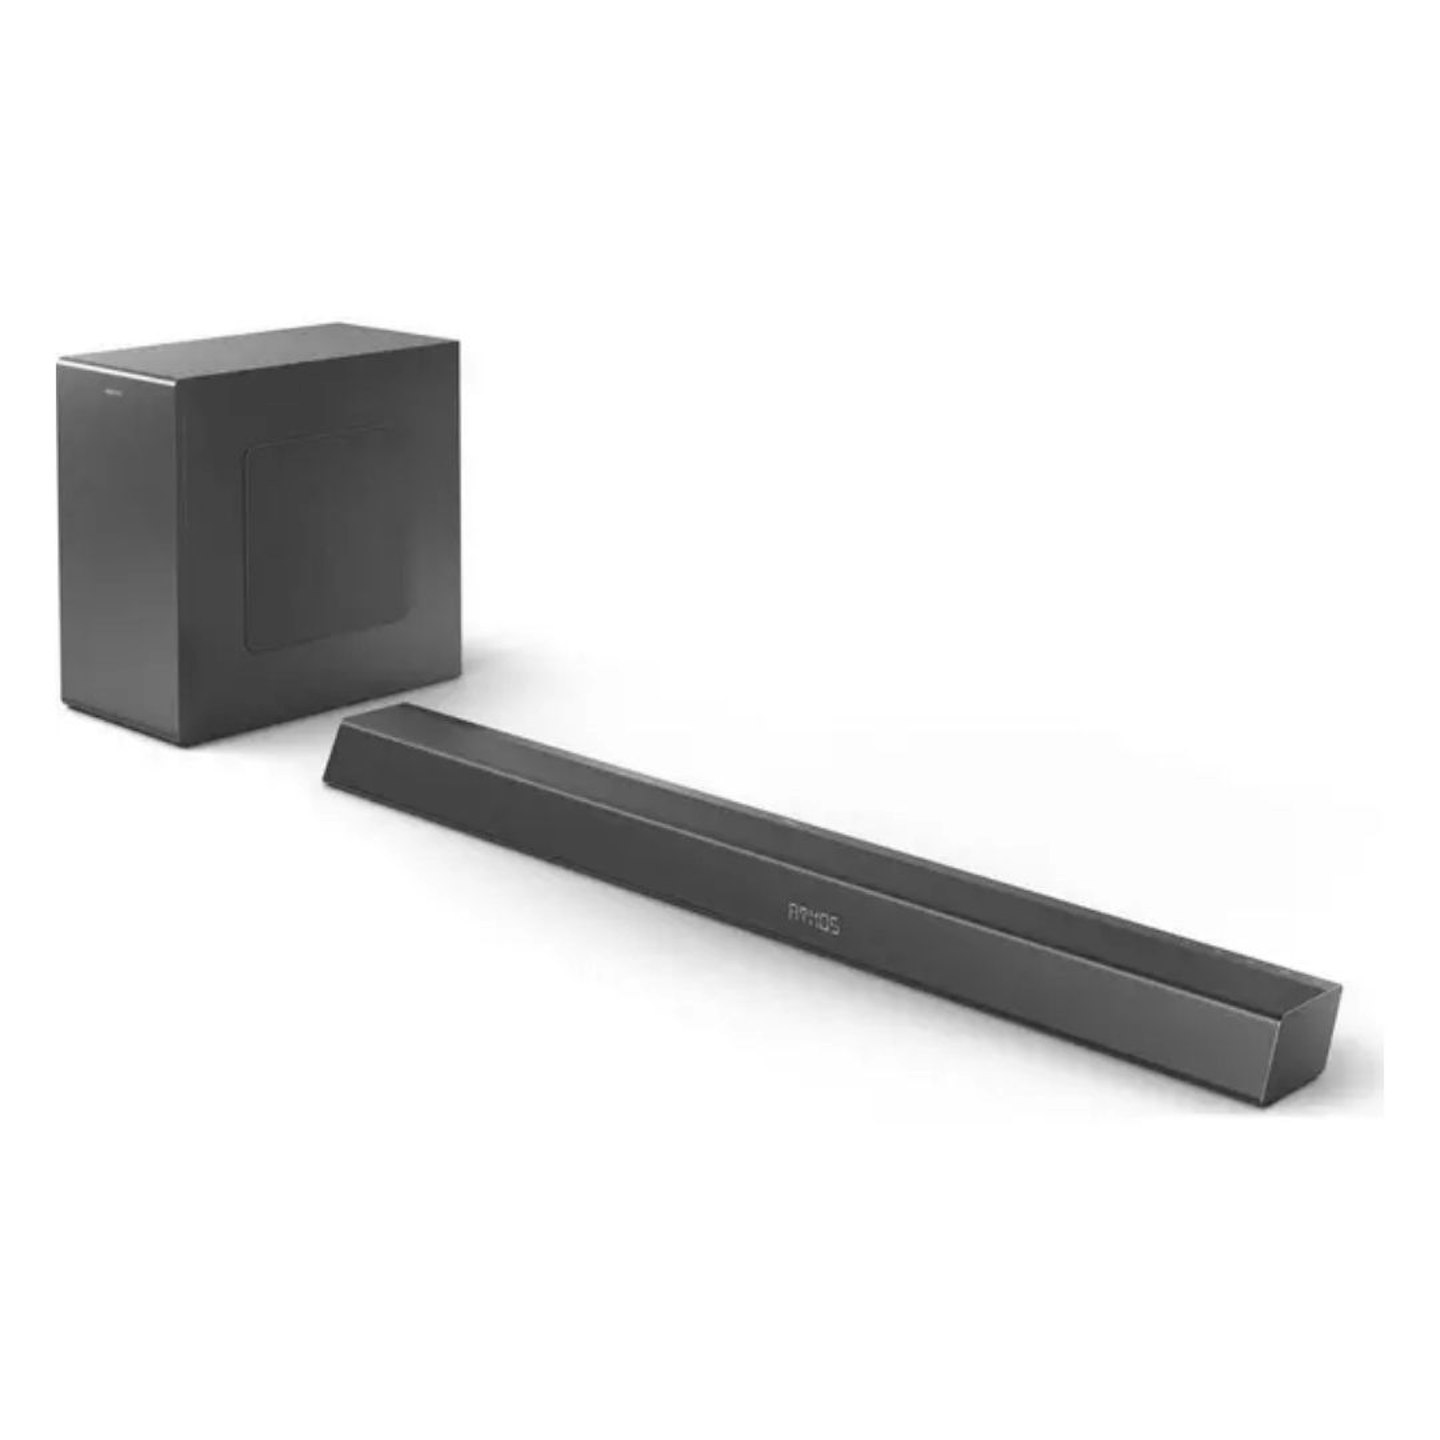 PHILIPS 3.1.2 Wireless Sound Bar with Dolby Atmos